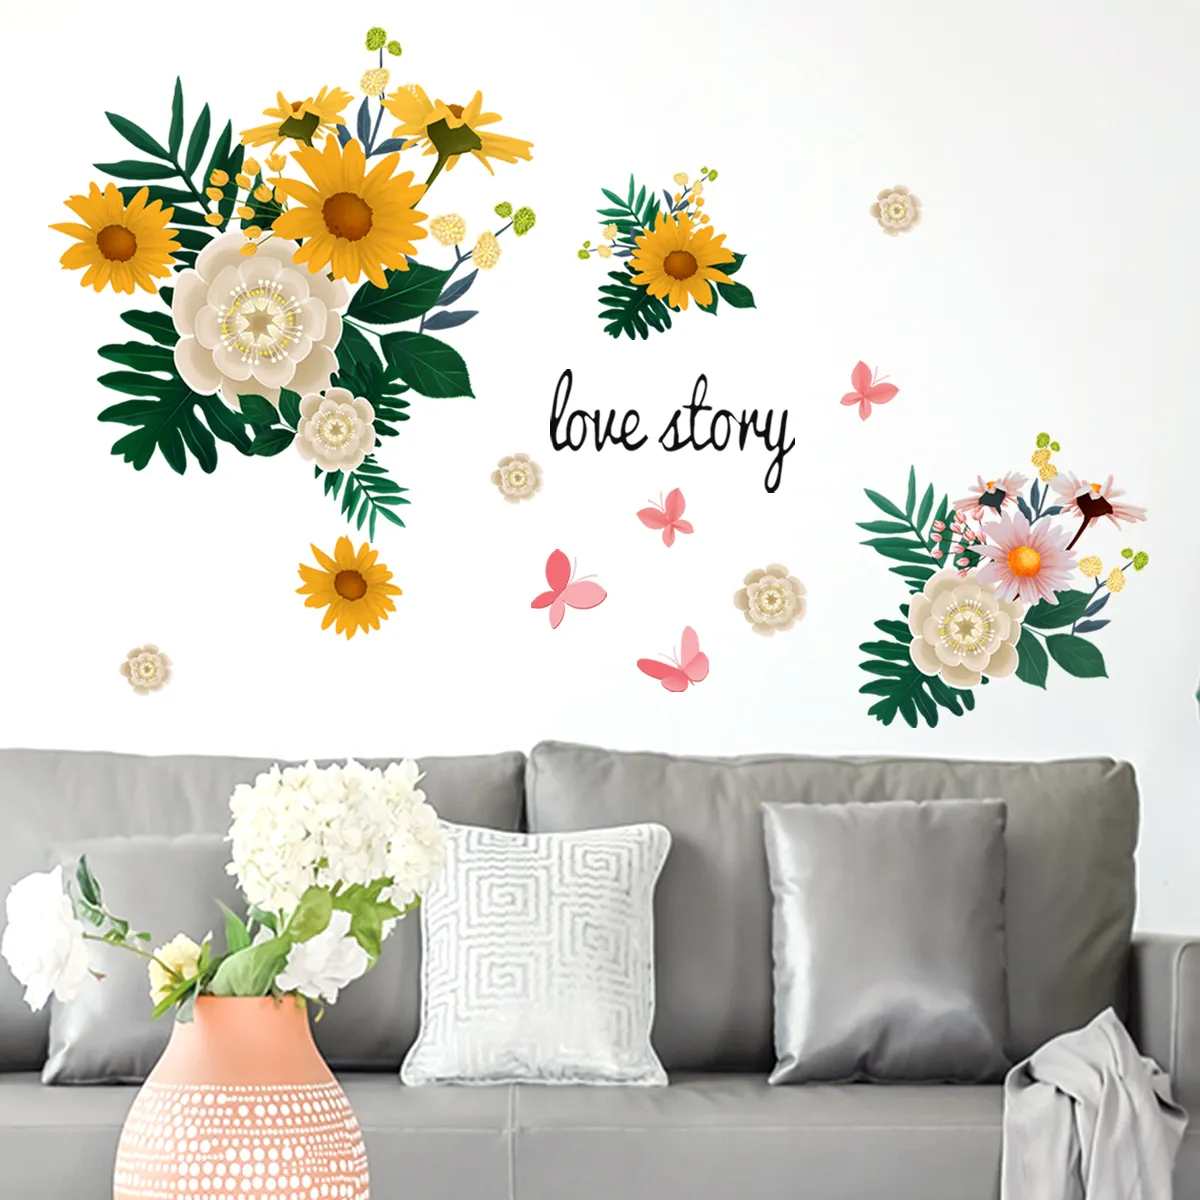 Flower Butterfly Wall Stickers Removable Wall Stickers Wall Art Decal Decor For Home Living Room Bedroom Background Decoration